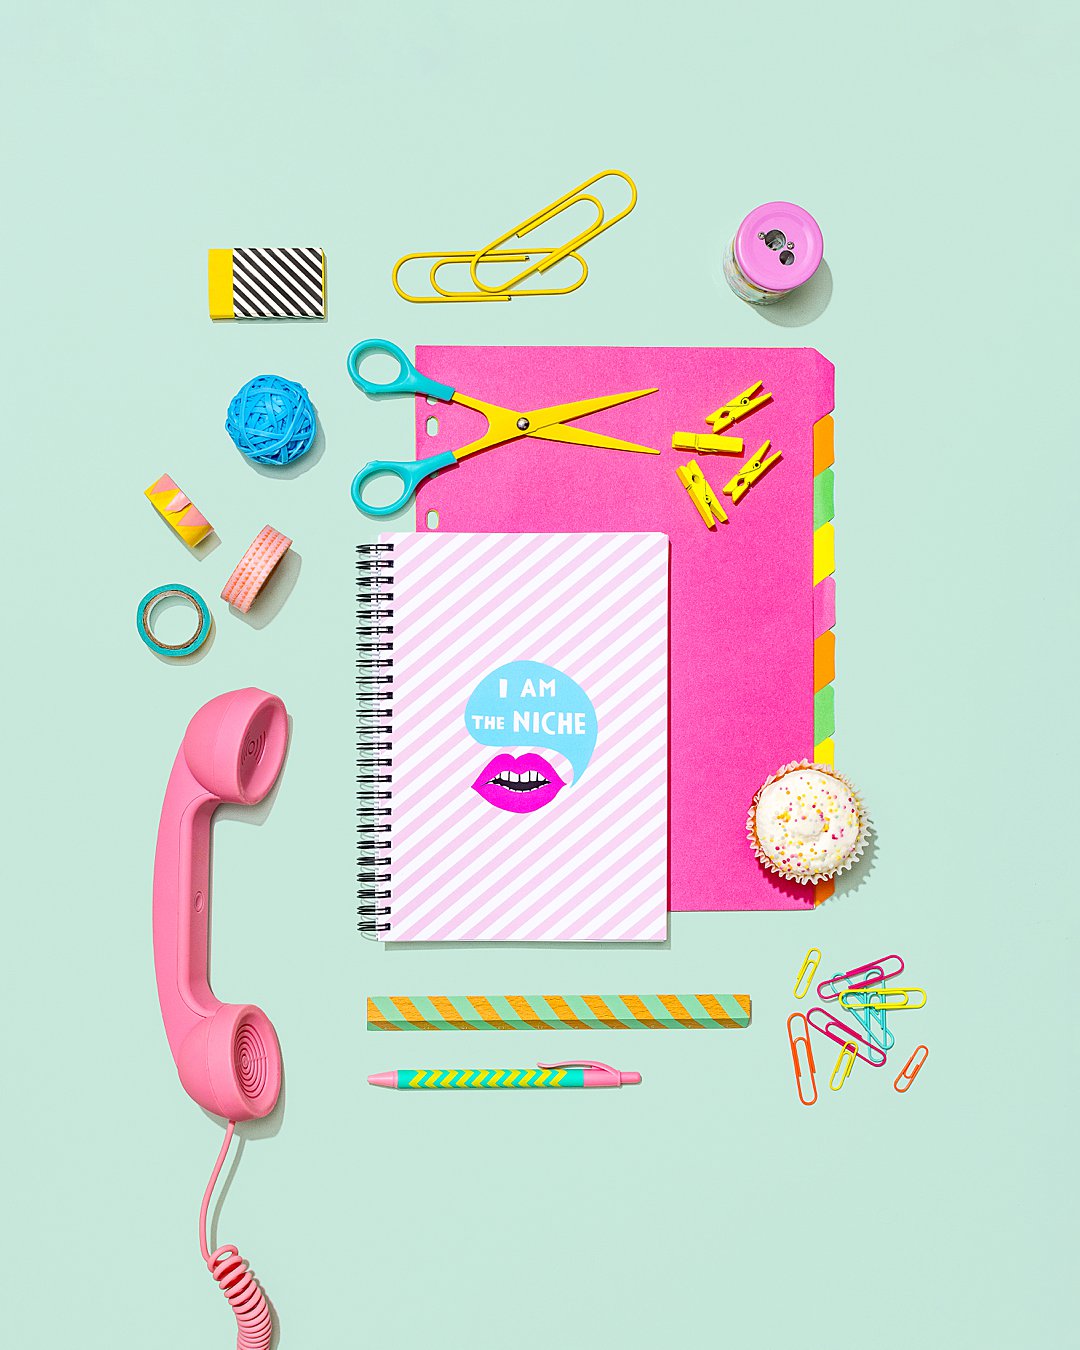 Colourful product photography for HIYA CREATIVE stationery accessories. Styled still life photography by HIYA MARIANNE.